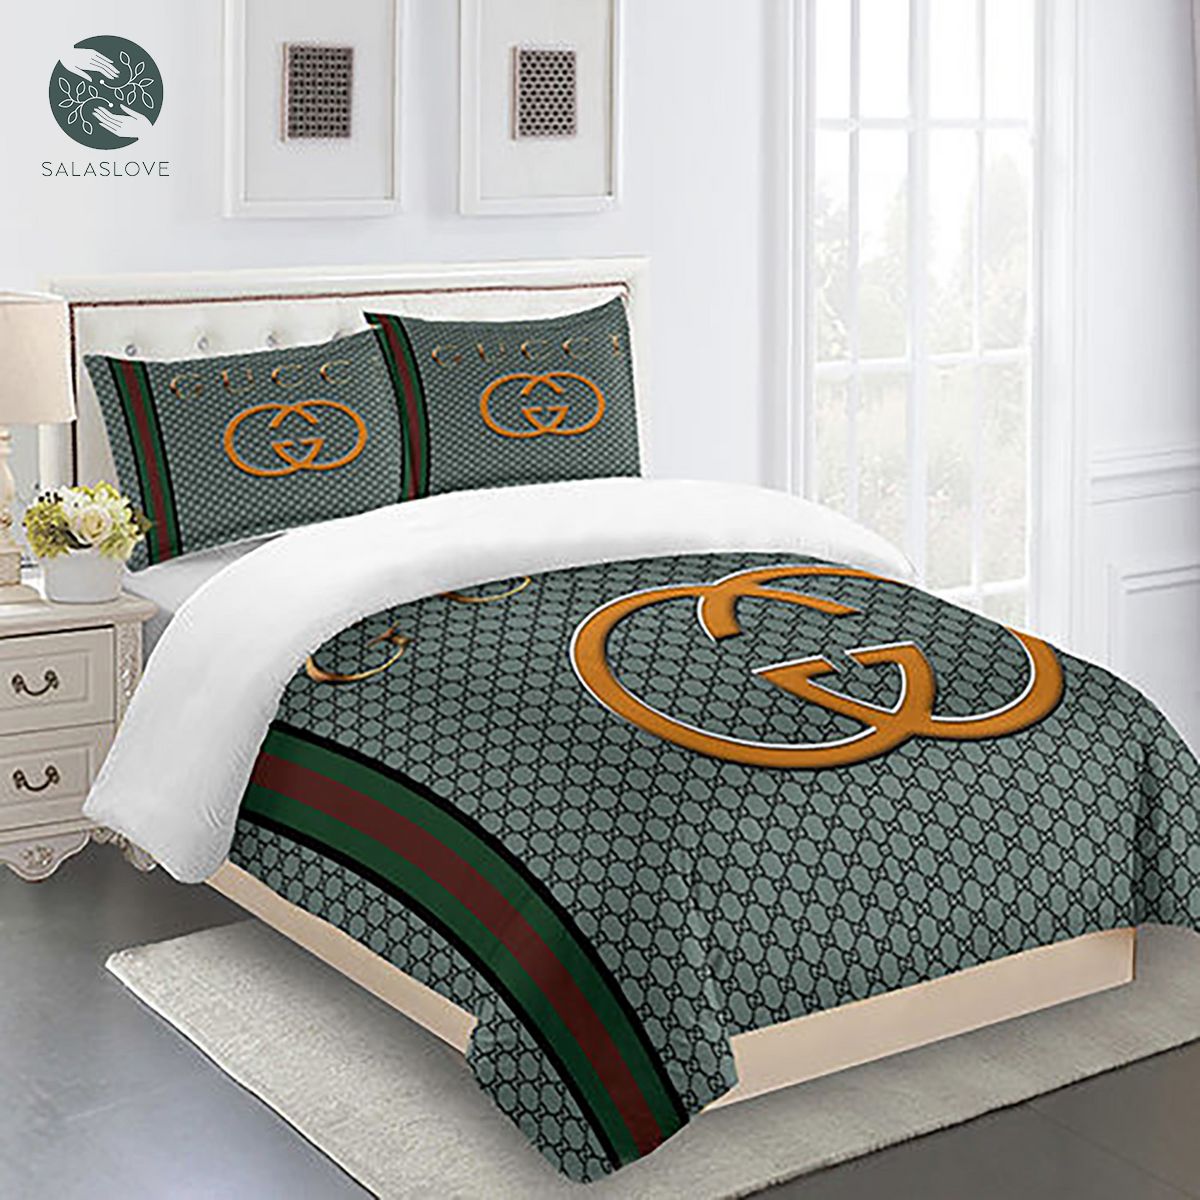 Gucci Bedding Set Gray Gold Green Red Luxury Duvet Cover Bedding Sets